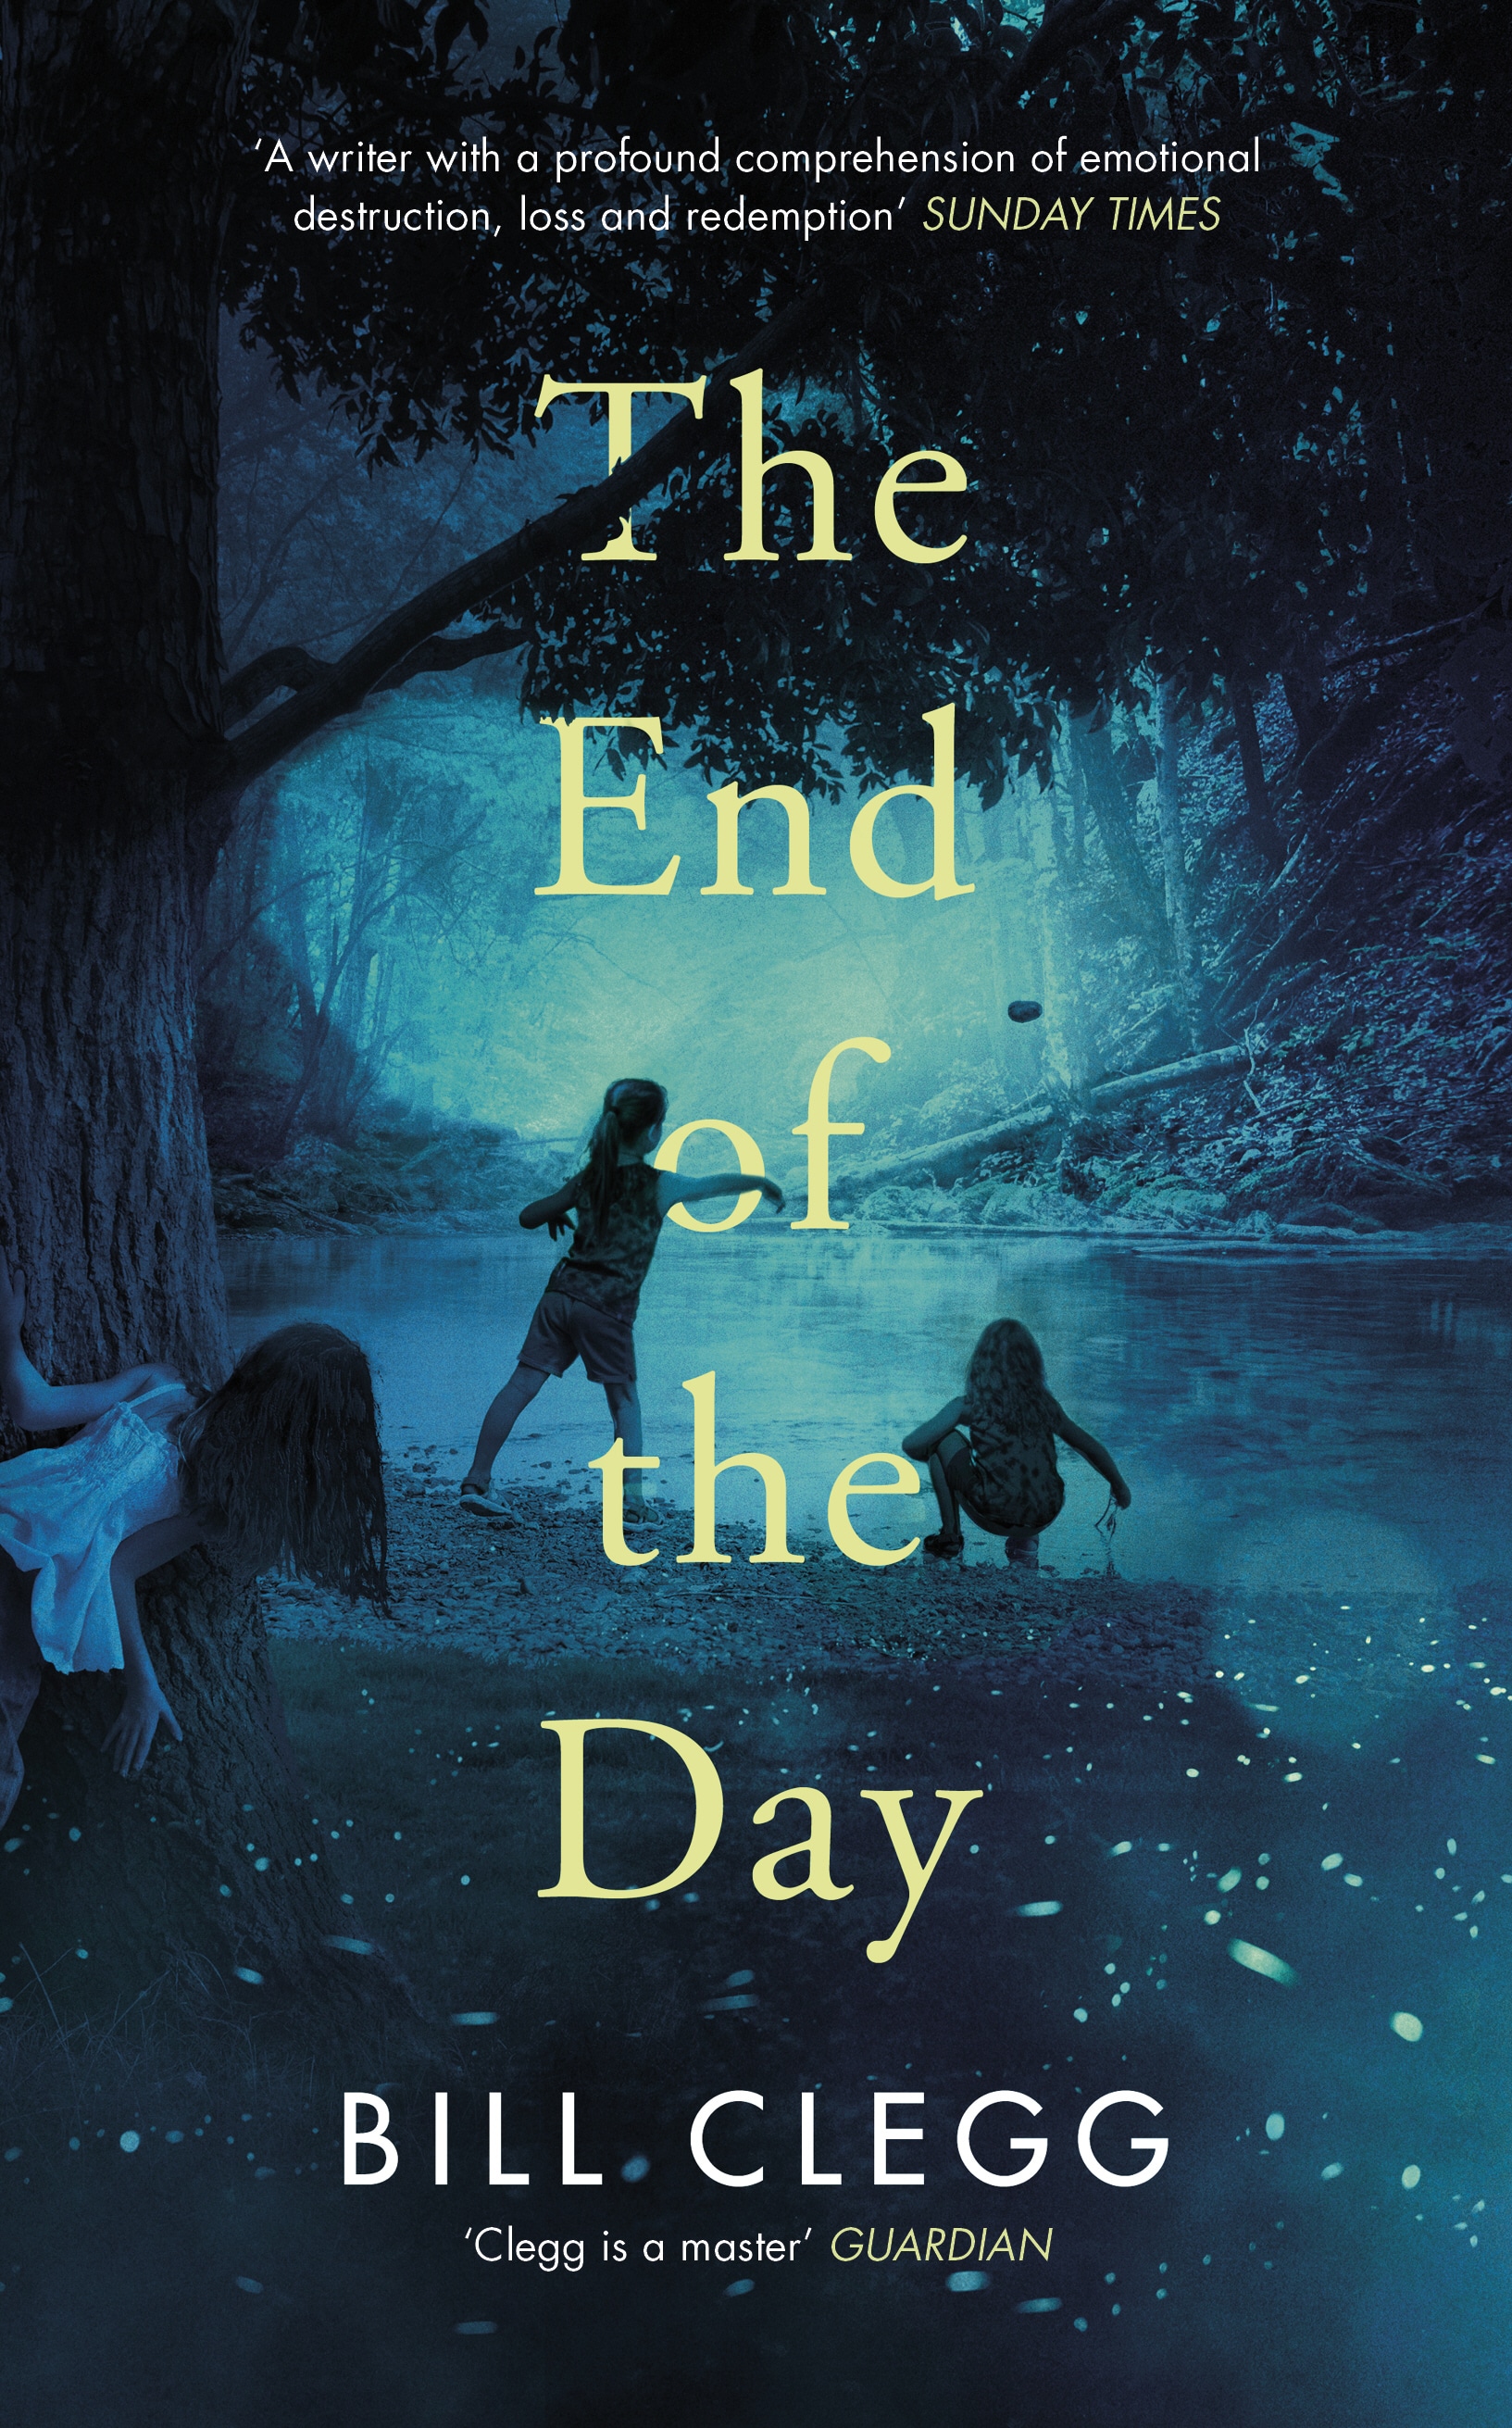 Book “The End of the Day” by Bill Clegg — October 1, 2020